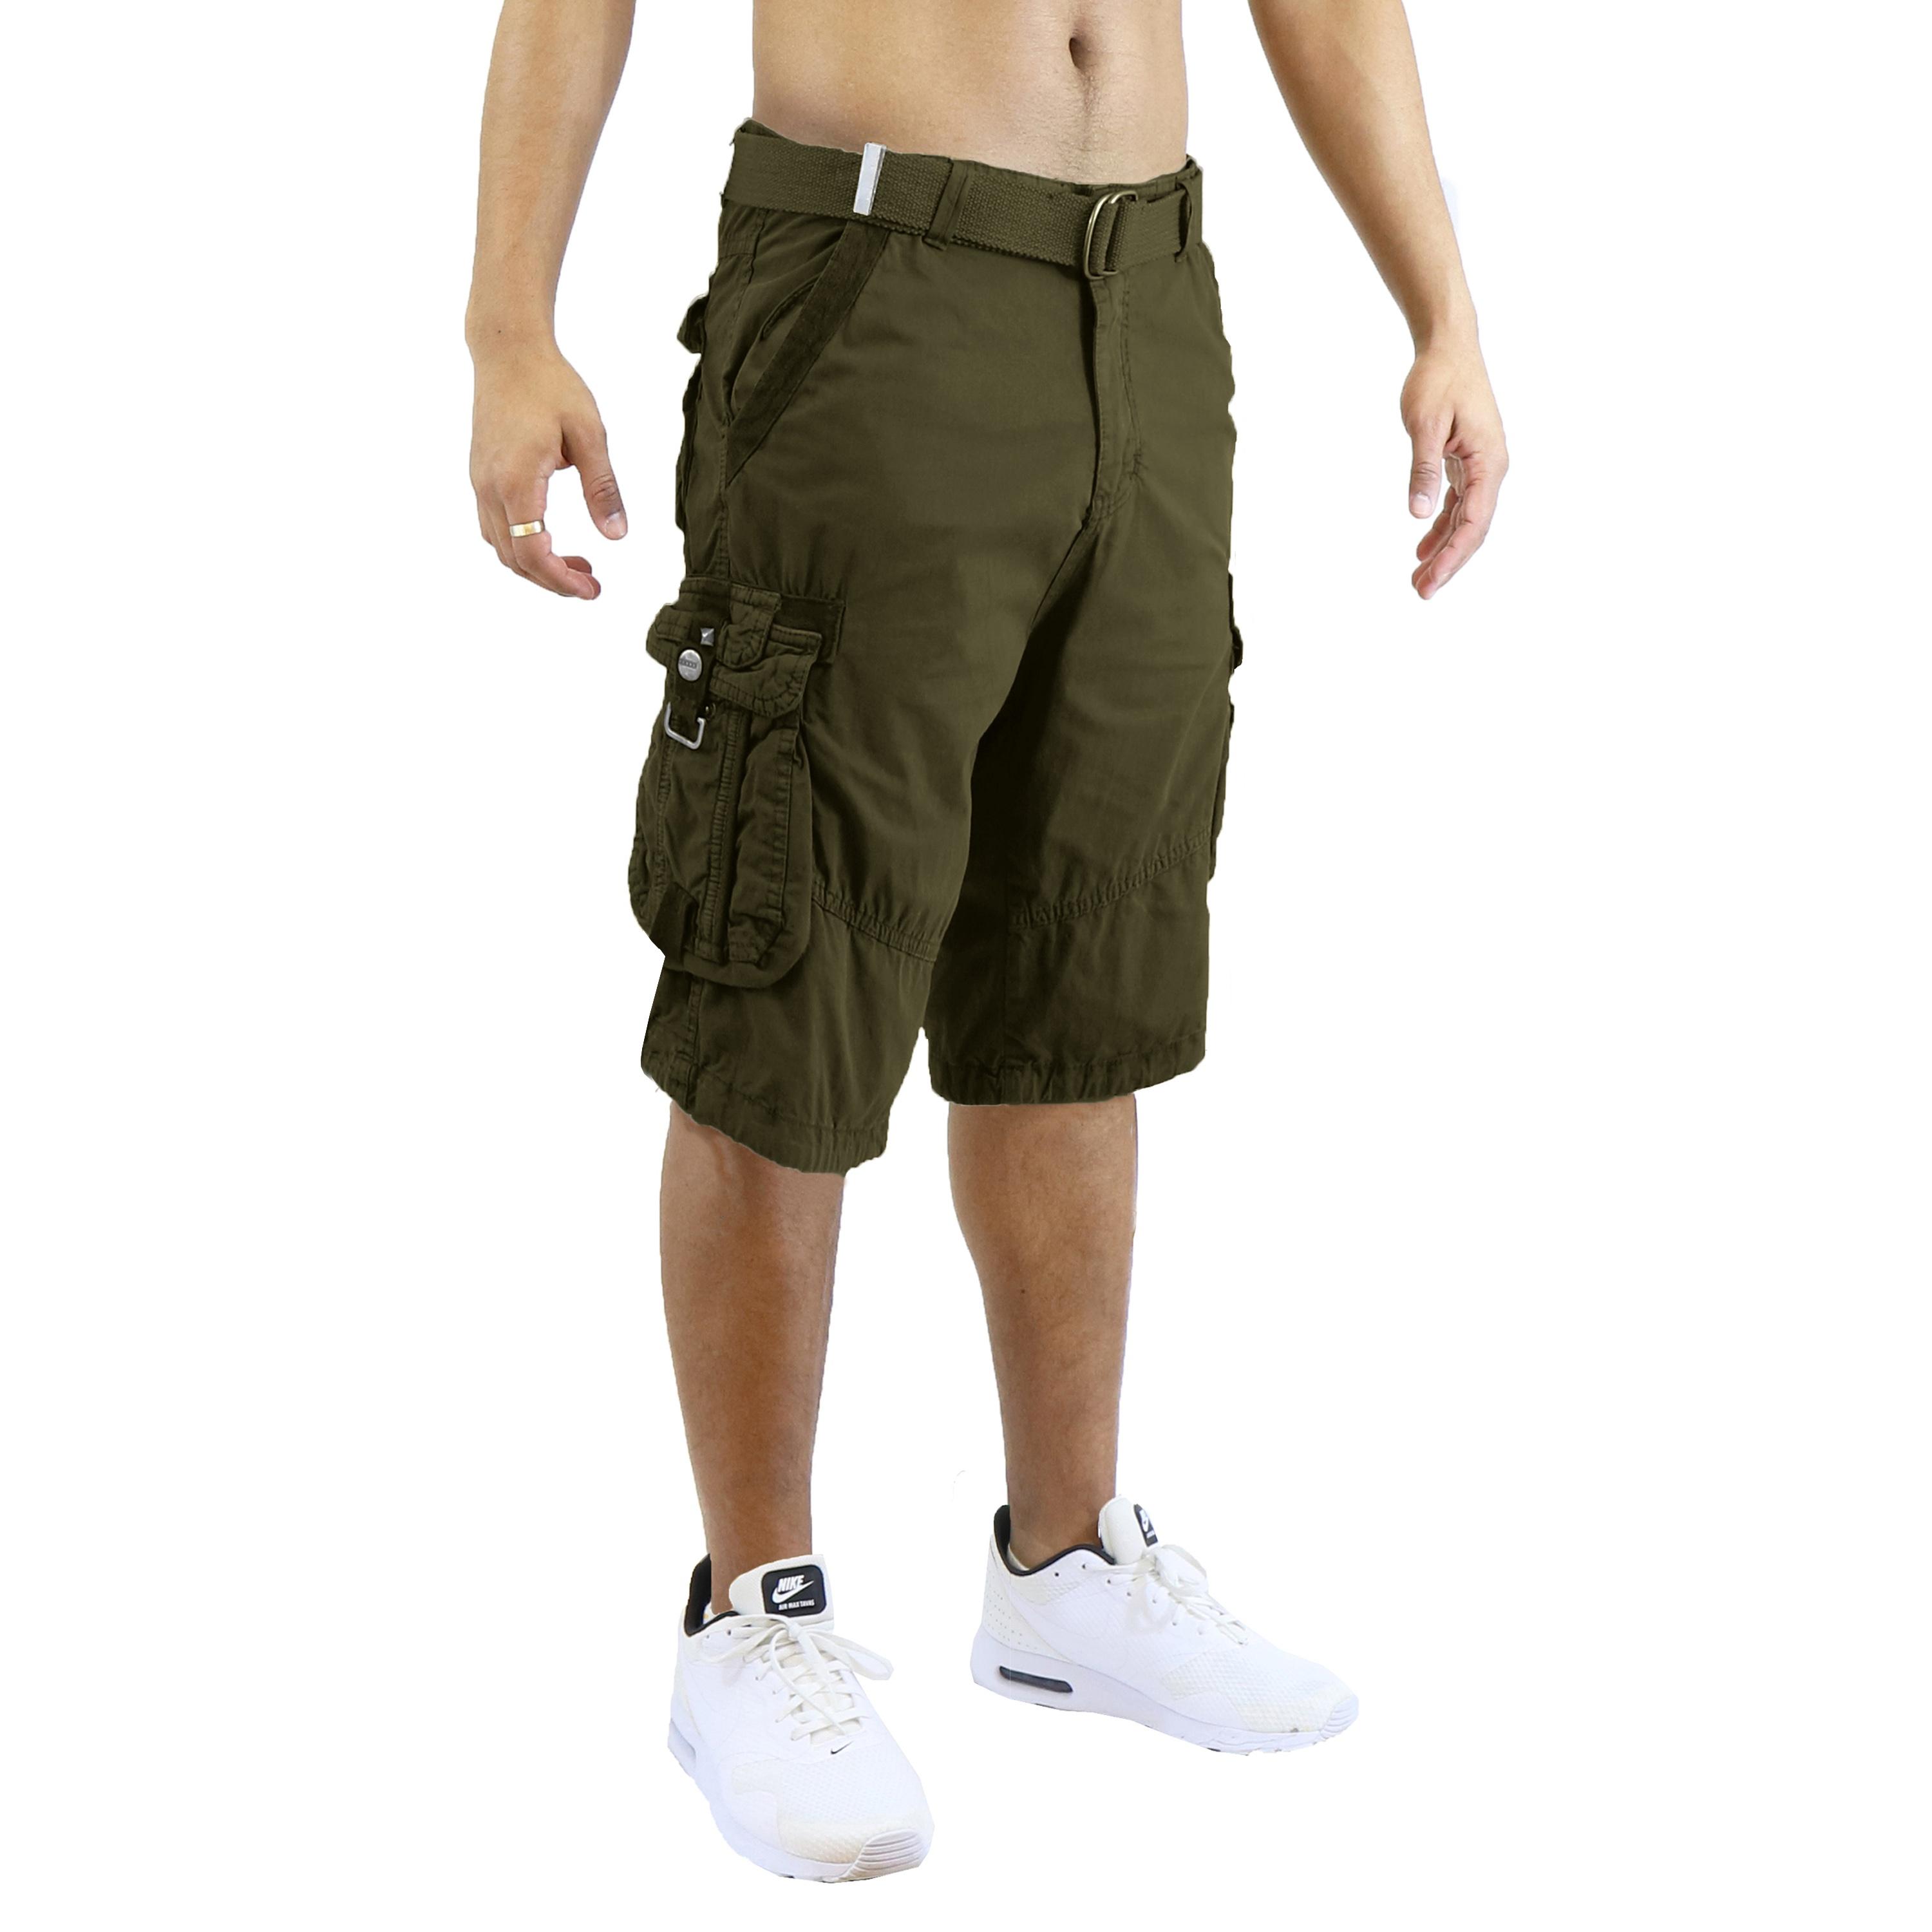 Men's Belted Cargo Shorts 100% Cotton Distressed Washed Style